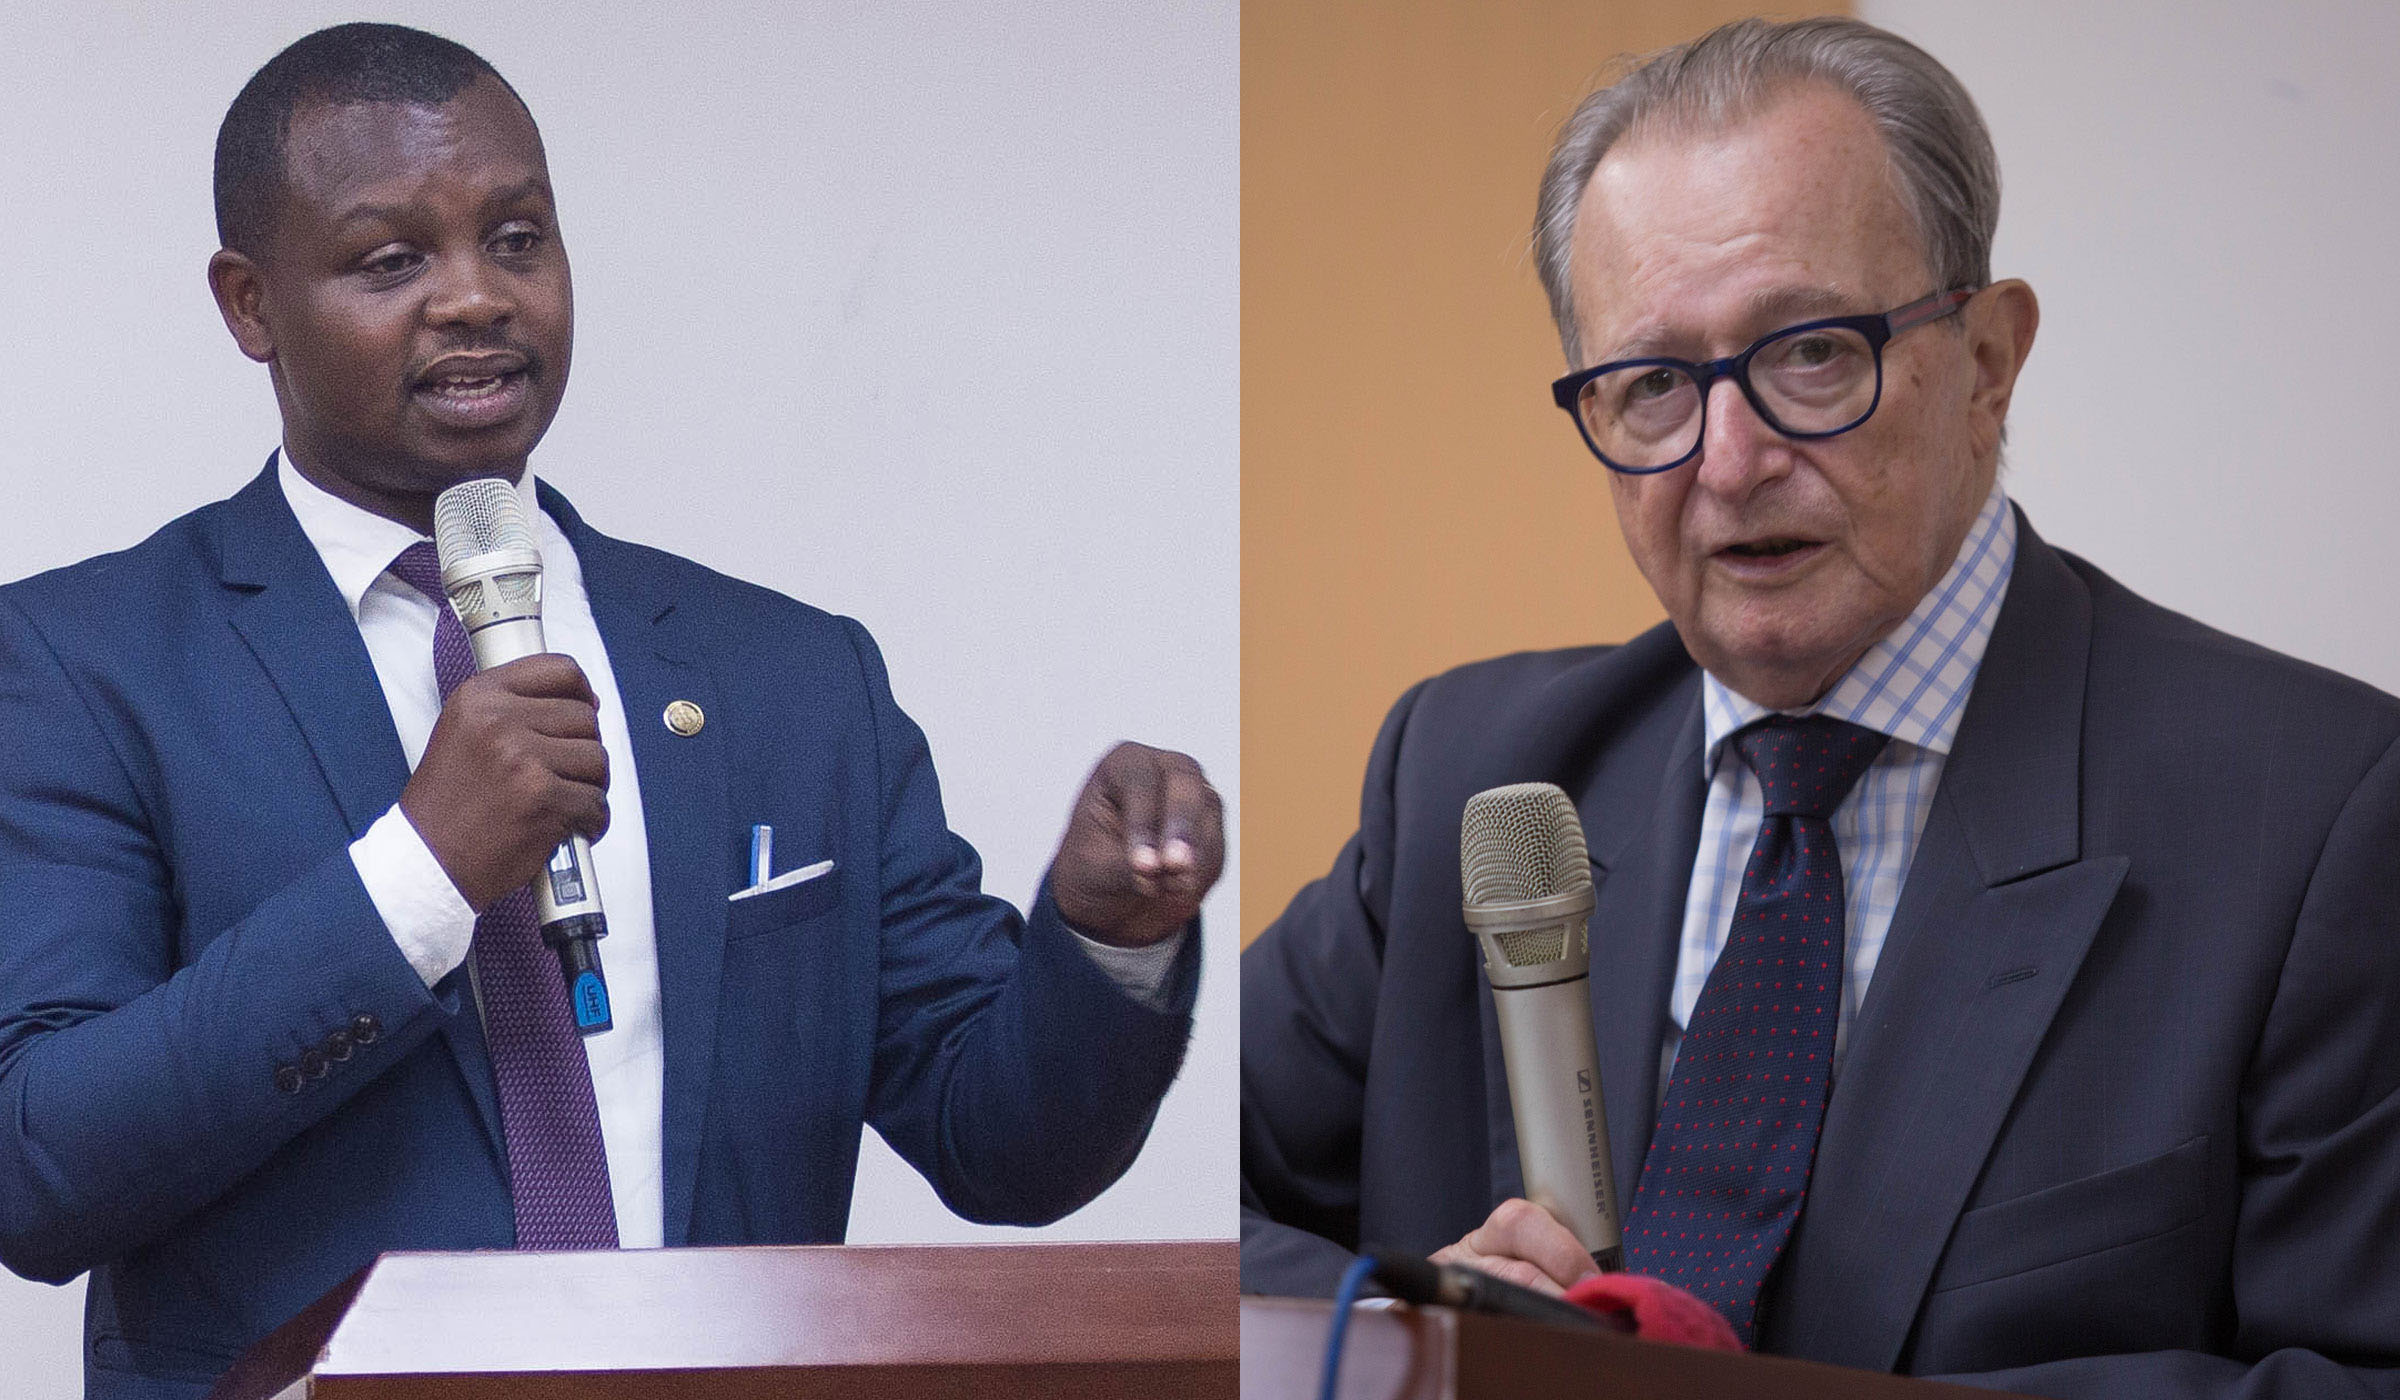 The Second Vice President of Ibuka, Freddy Mutanguha, and the President of the International Residual Mechanism for Criminal Tribunals, Judge Carmel Agius, at the meeting in Kigali on April 2, 2019. Nadege Imbabazi.